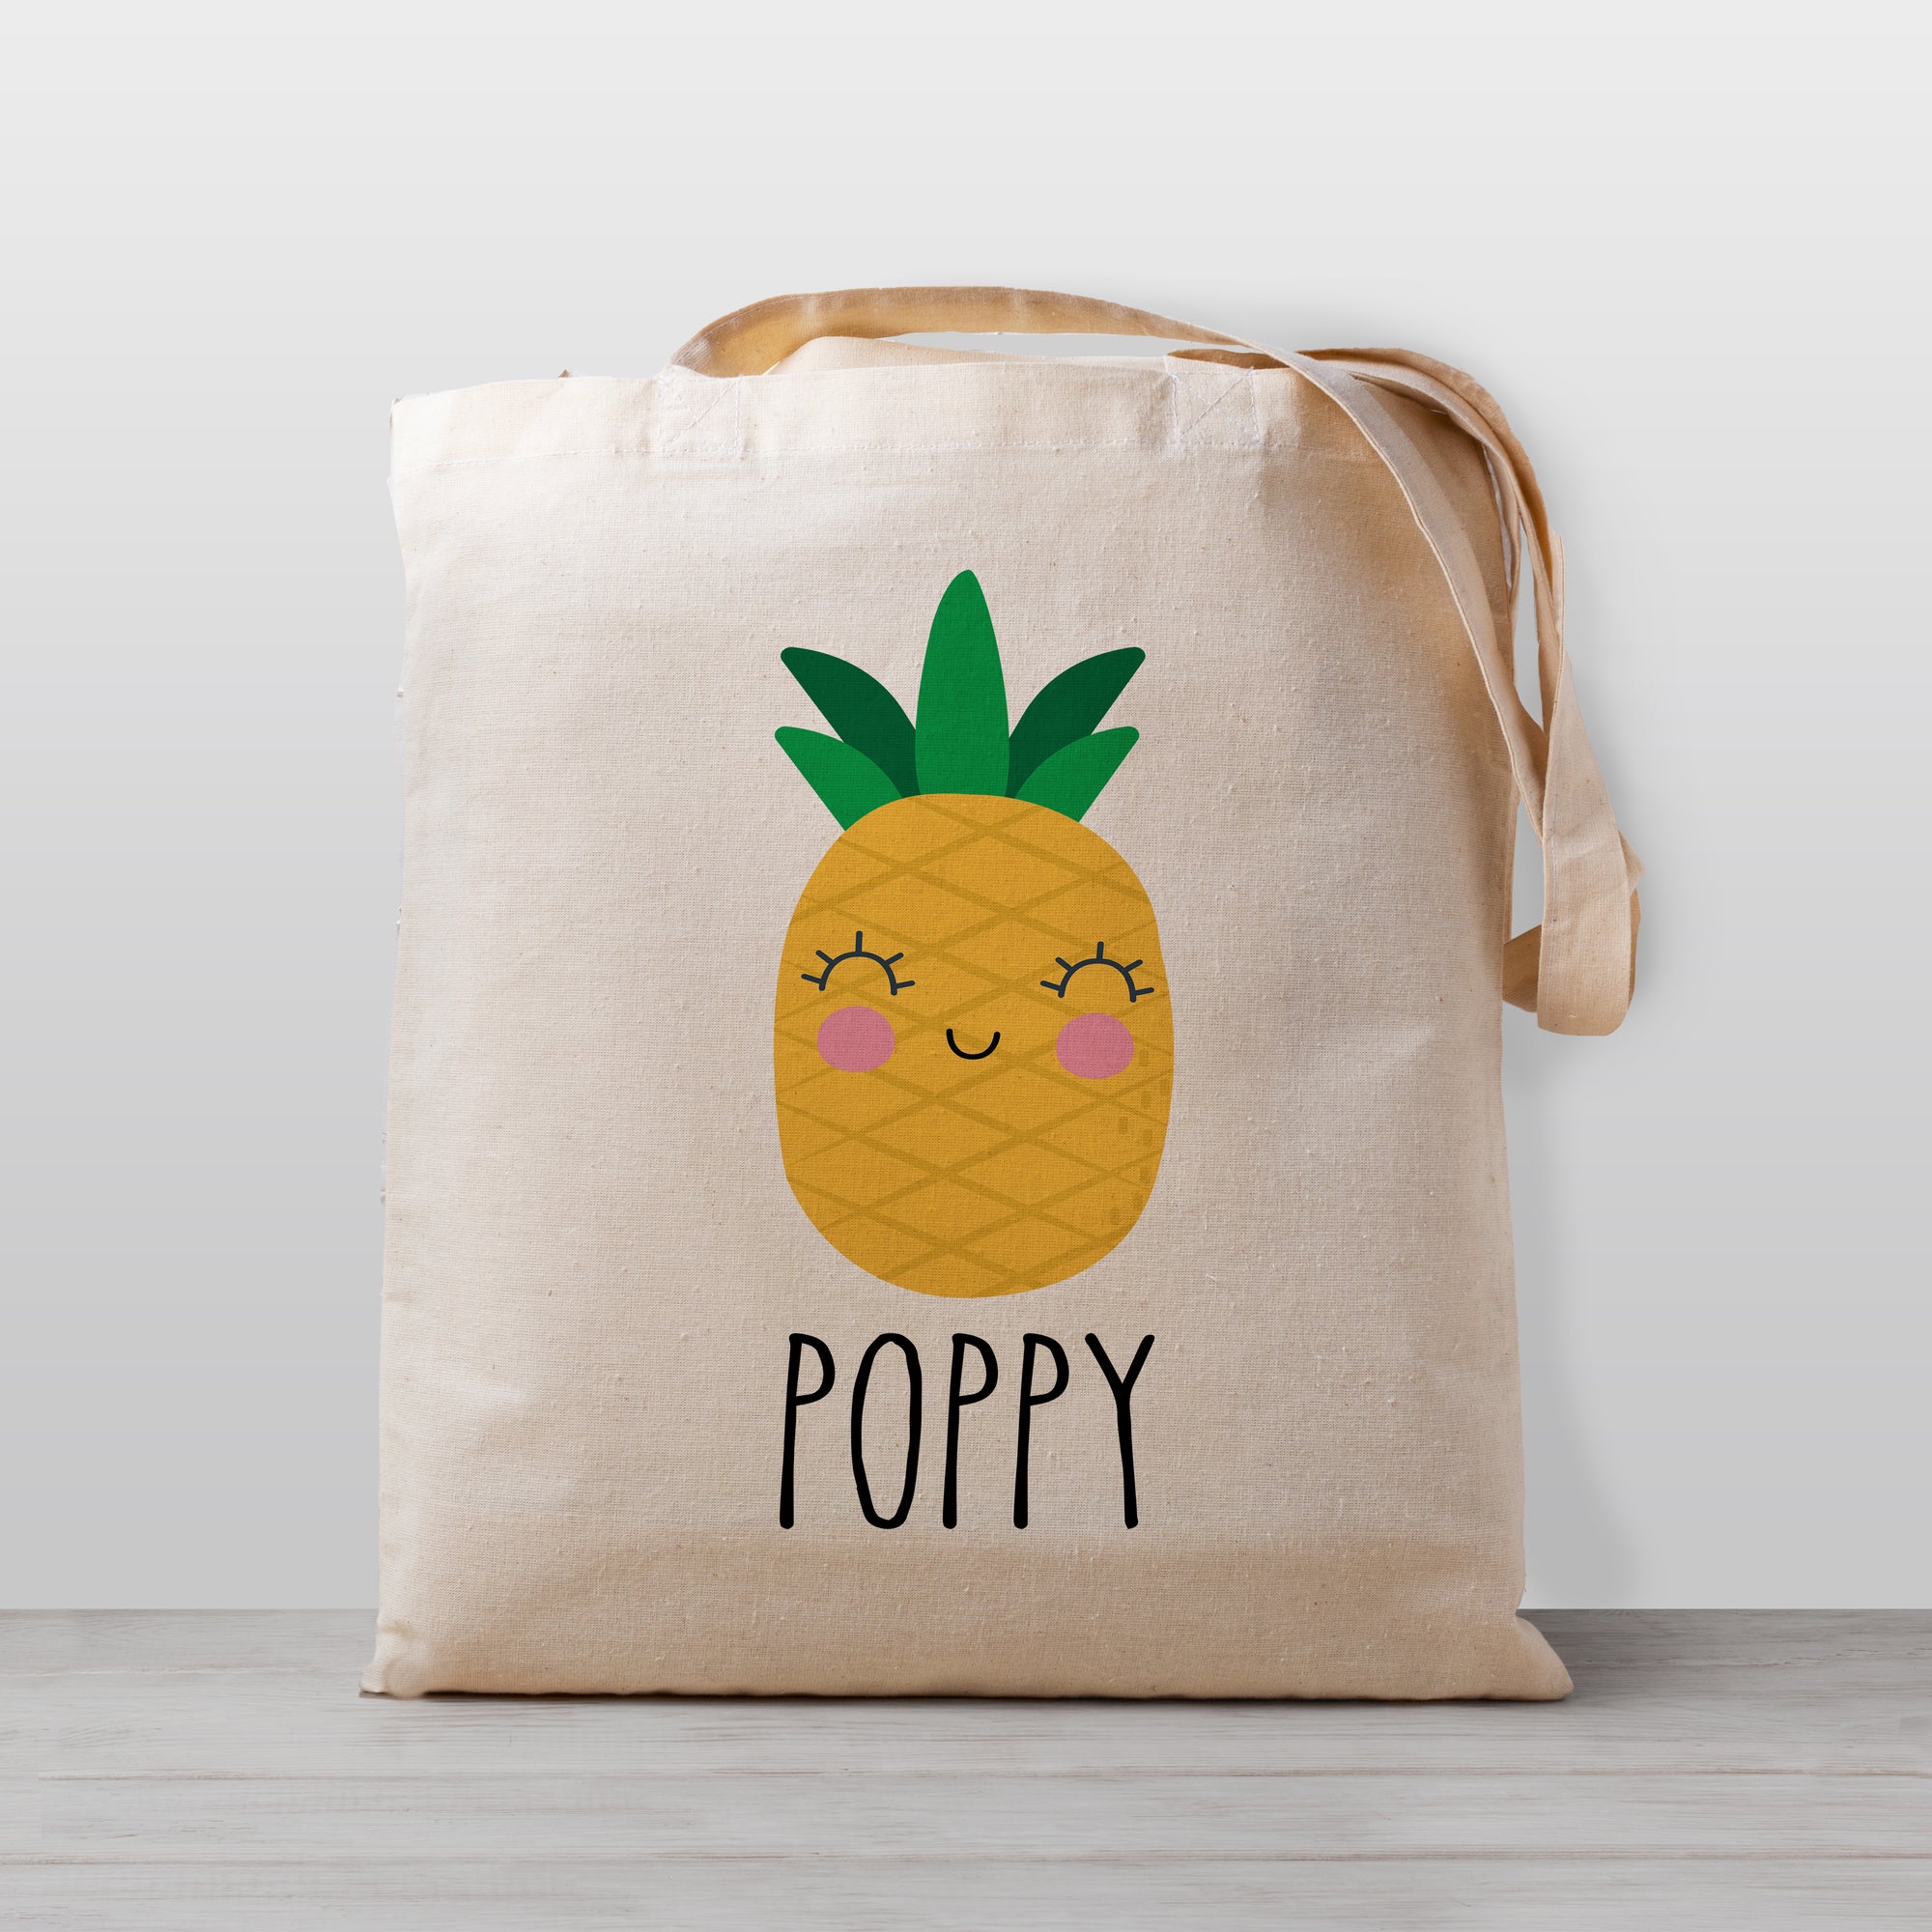 Cute Pineapple tote bag, personalized with your child's name. 100% cotton canvas, great for daycare, preschool, kindergarten, or to use for library books